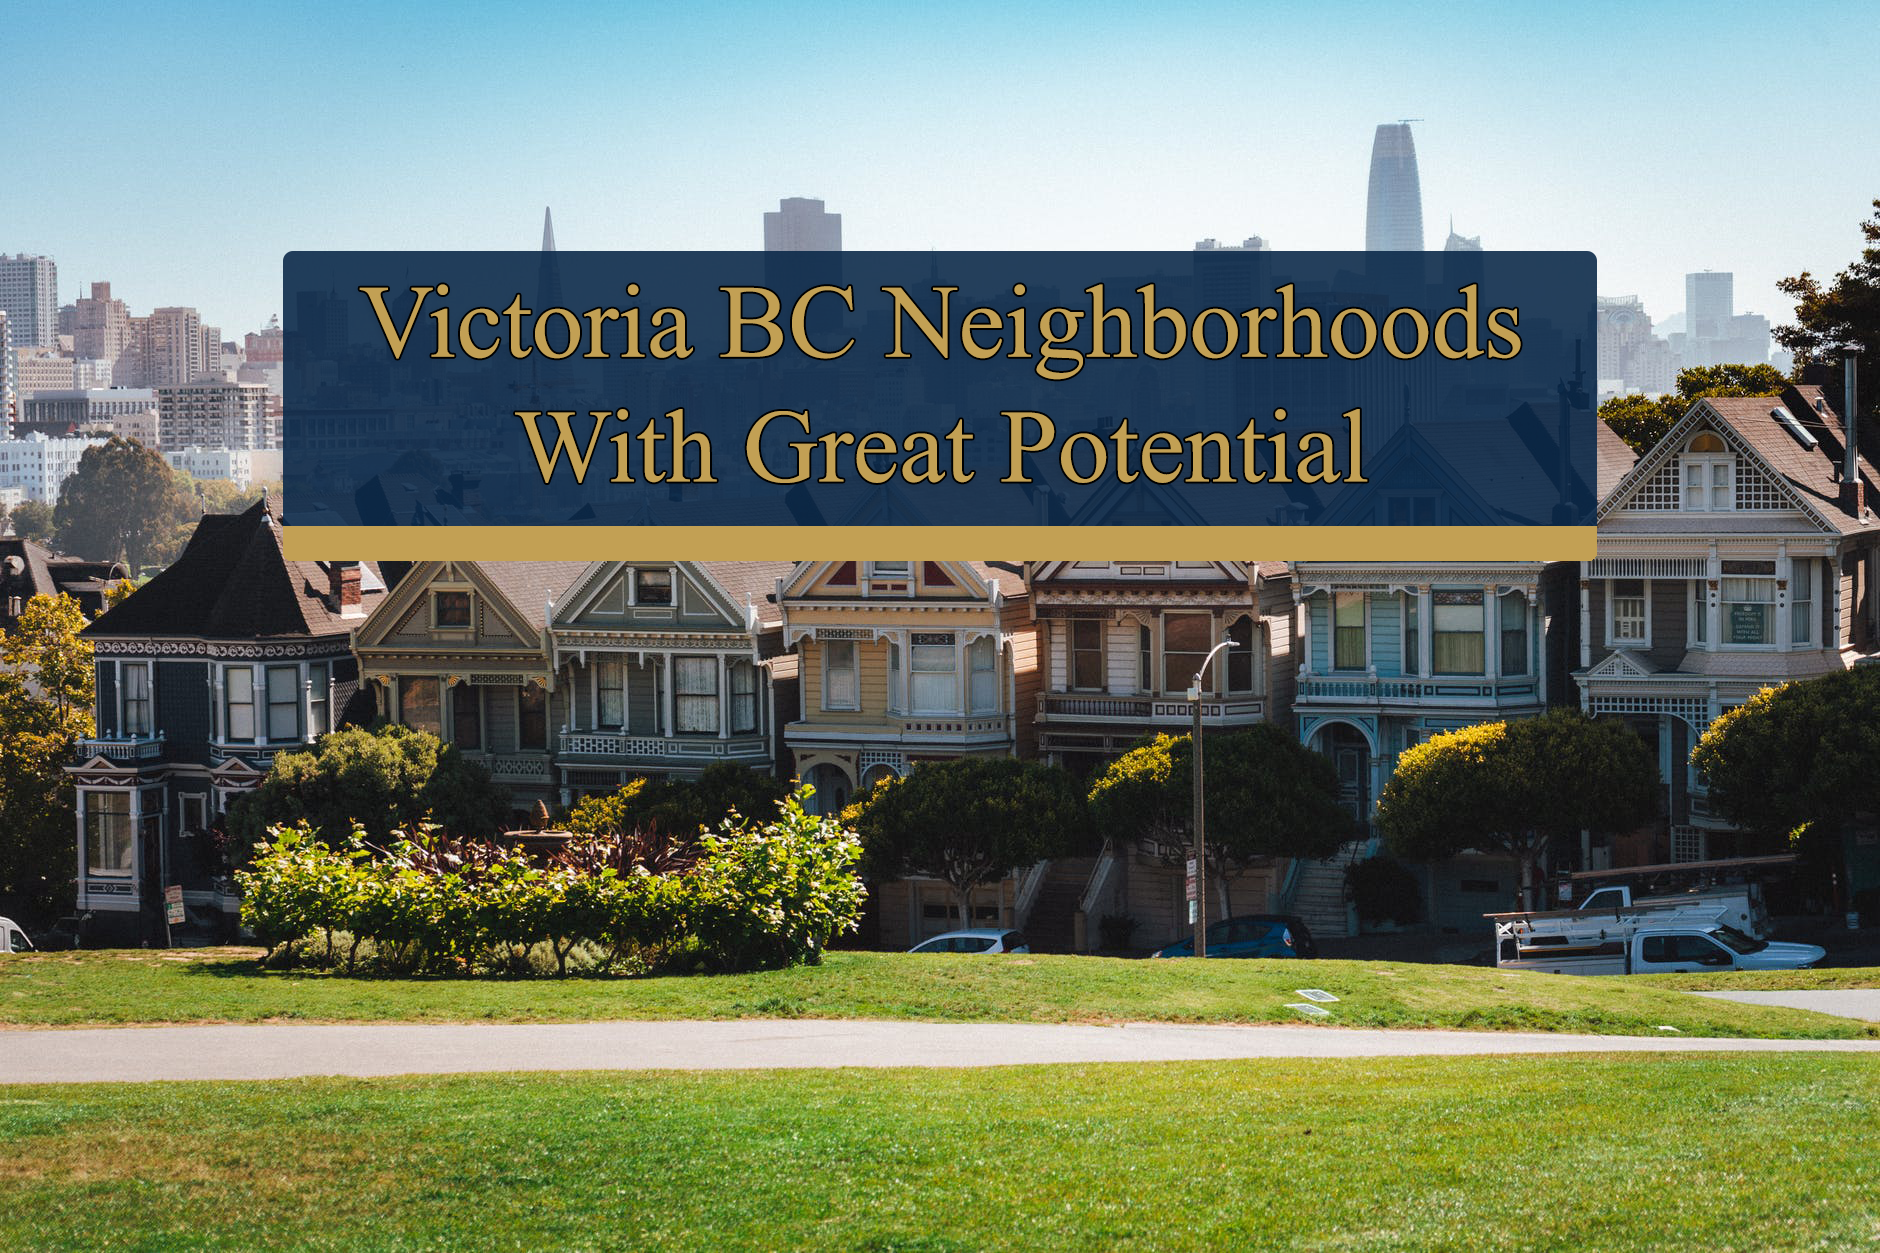 Victoria BC neighborhoods with great potential